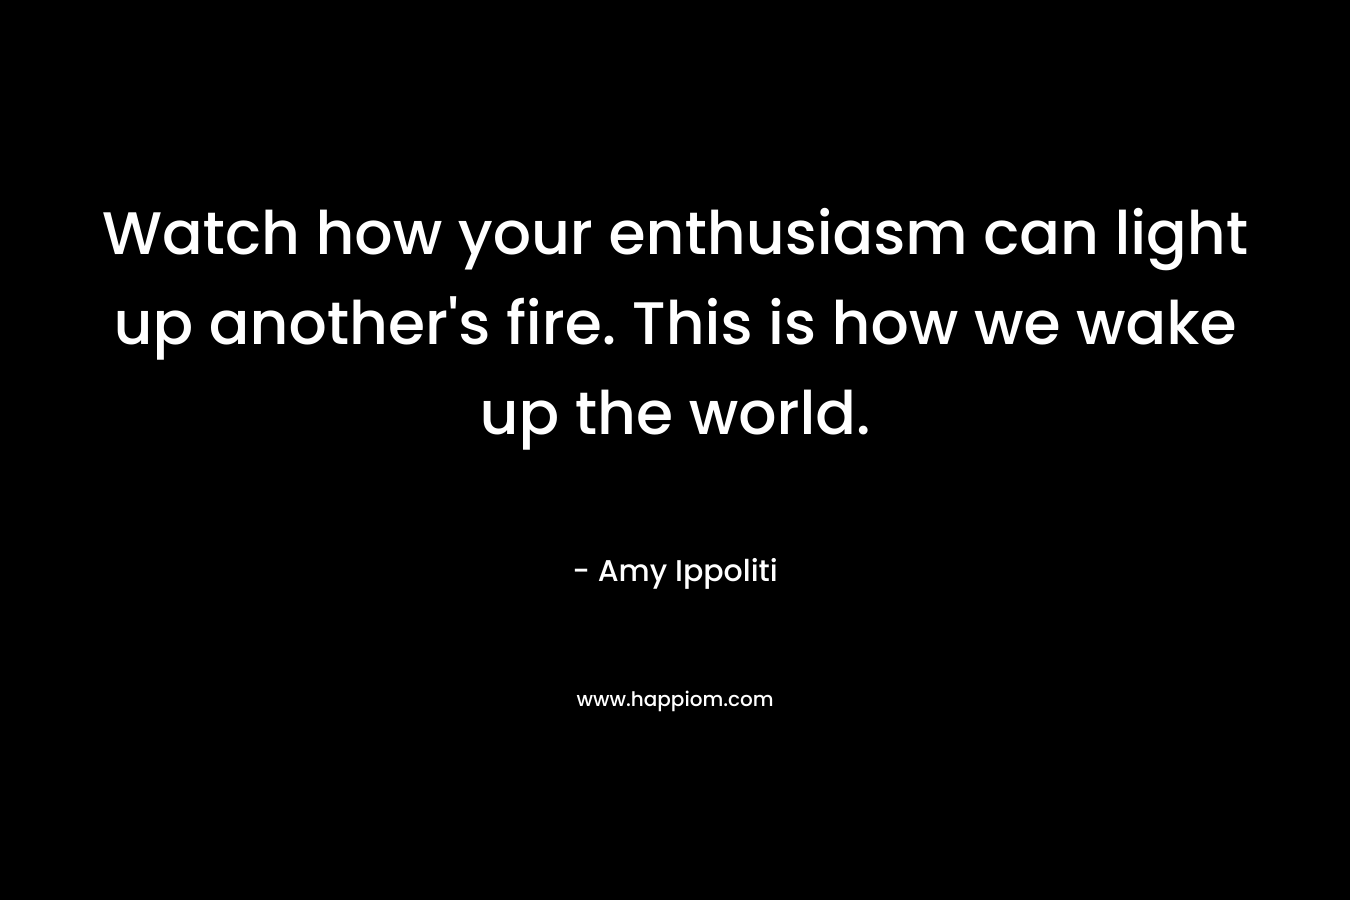 Watch how your enthusiasm can light up another's fire. This is how we wake up the world.